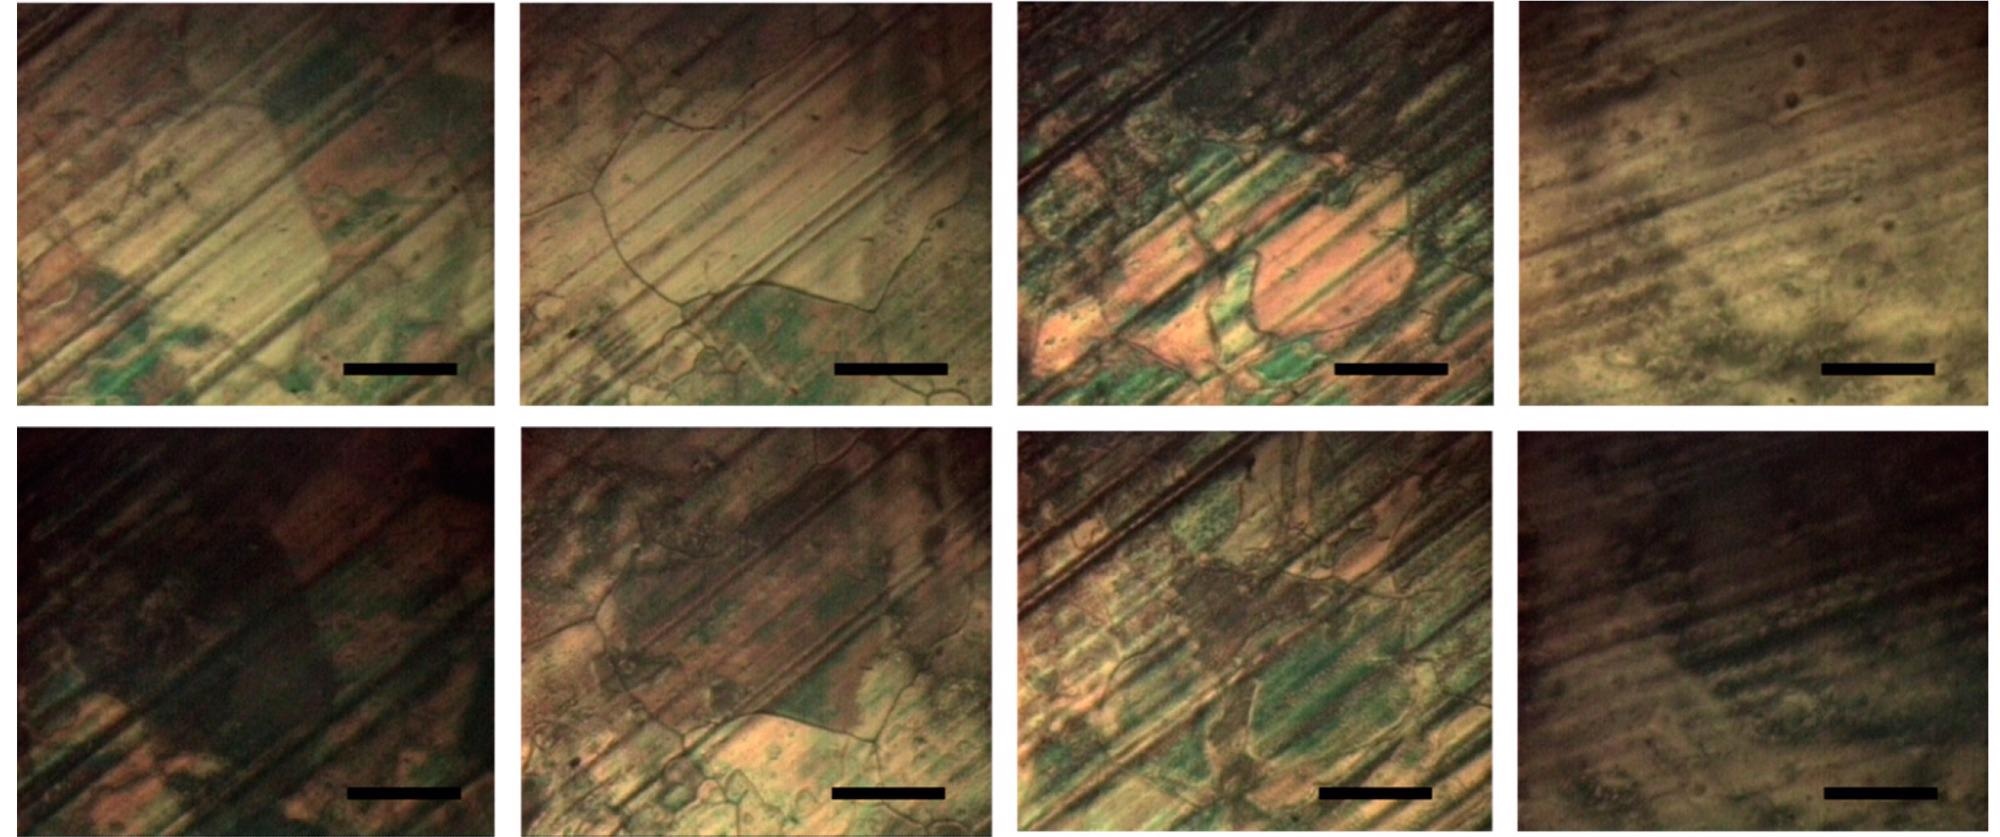 Four vertical pairs of microphotographs of E7-coated graphene (top—bright state; bottom—dark state achieved after rotation at 45°). The images depict: graphene grains on electropolished Cu foil (left two pairs) and on nonprocessed Cu foil (right two pairs). The scale bars represent 100 µm.